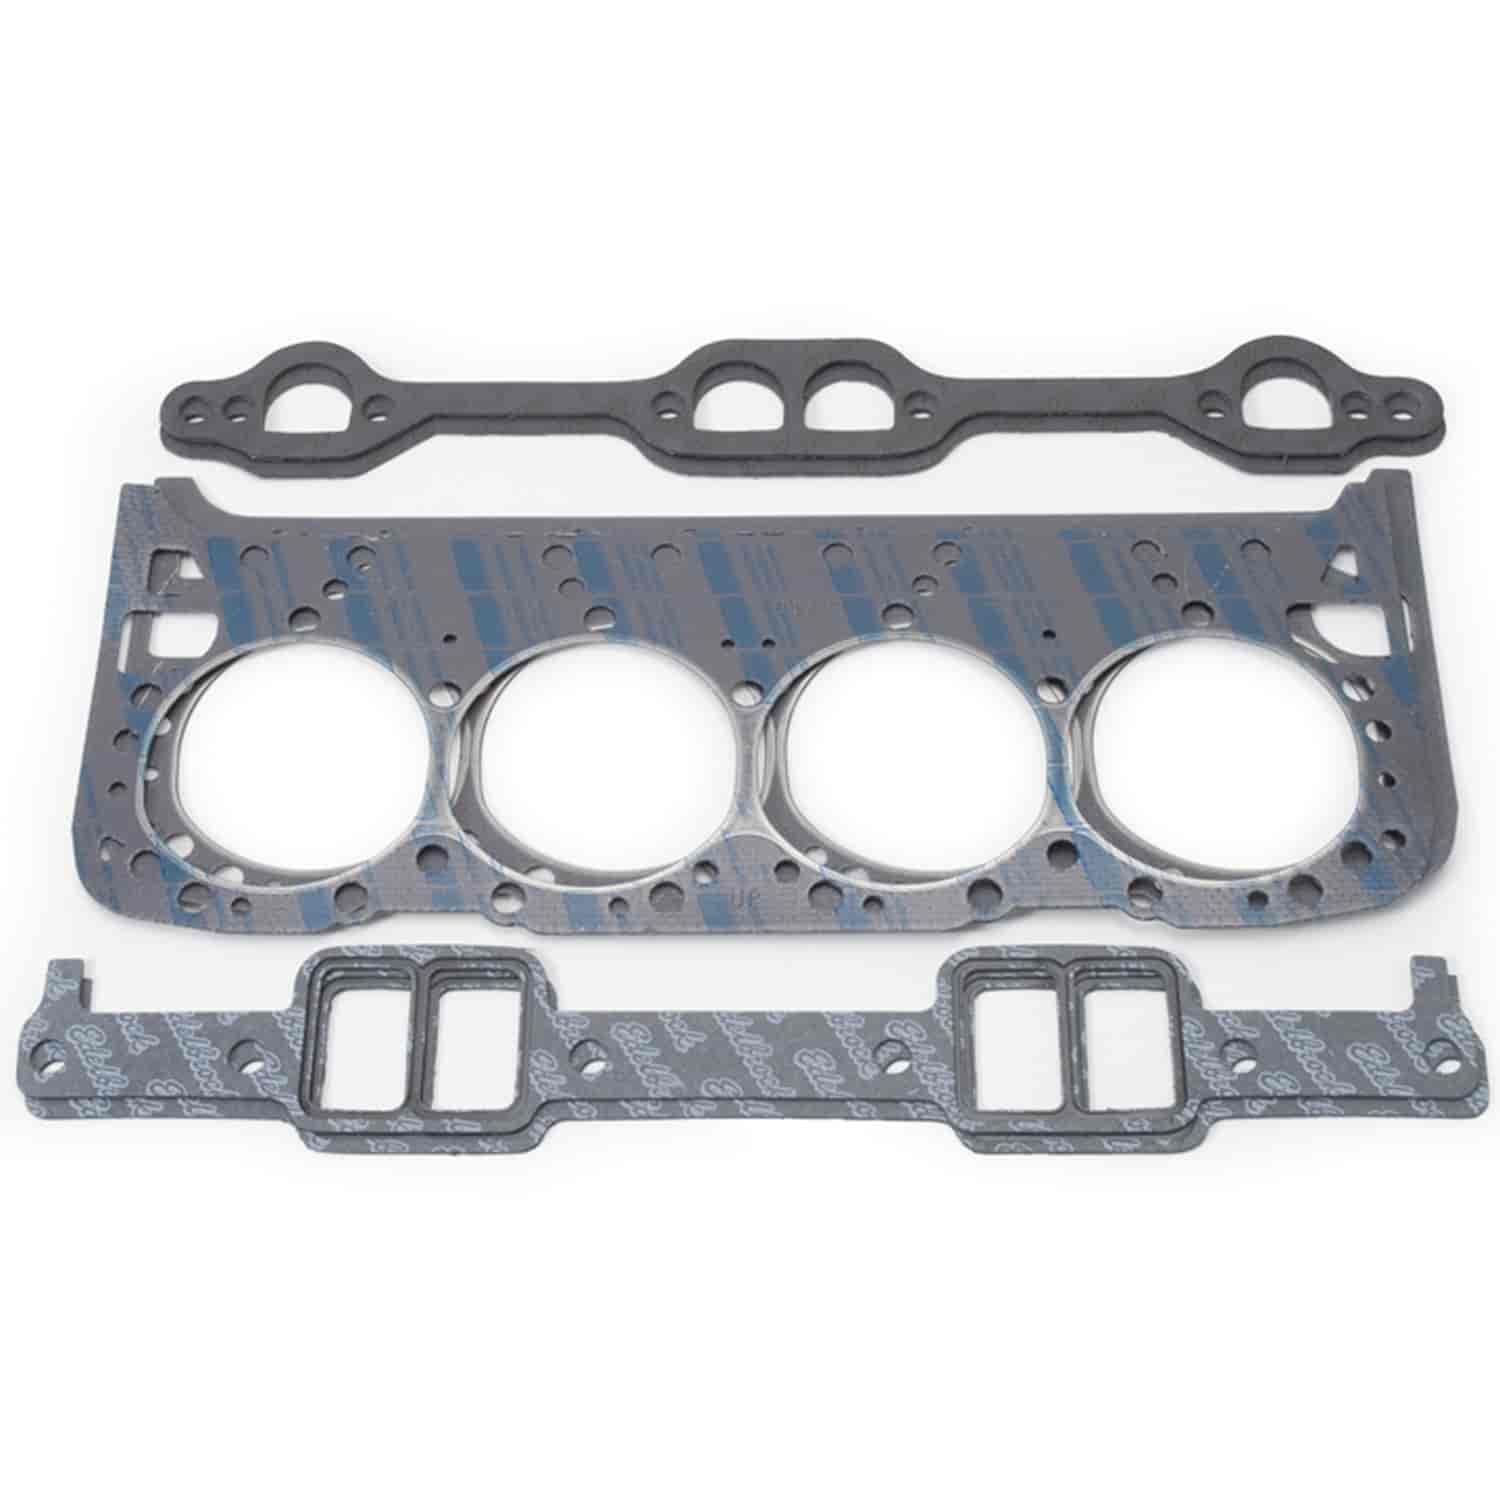 Complete Head Gaskets Set for Chevy LT1 1992-1997